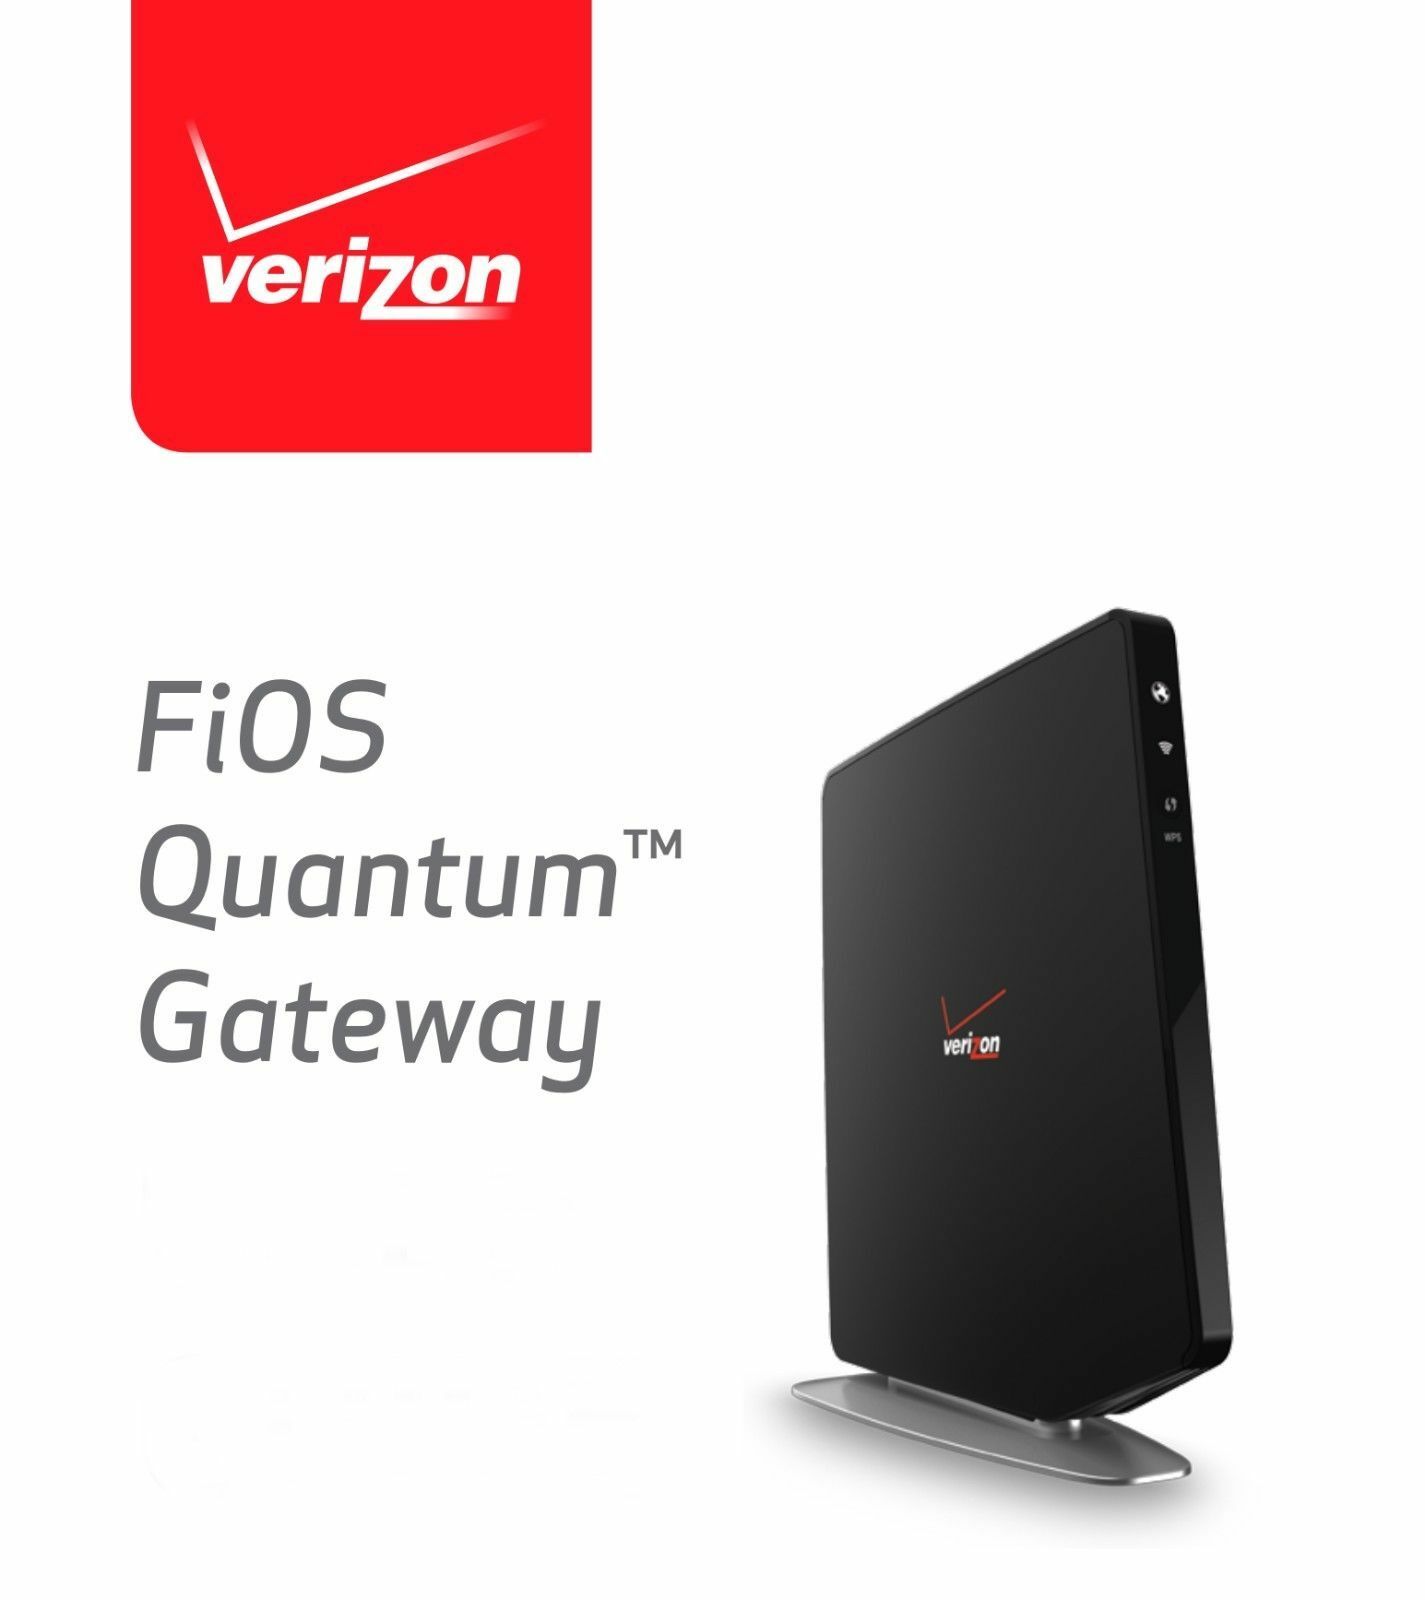 Verizon G1100 Router Fios-g1100 Dual Band W/ac &cat 5e With Stand(fios Firmware)